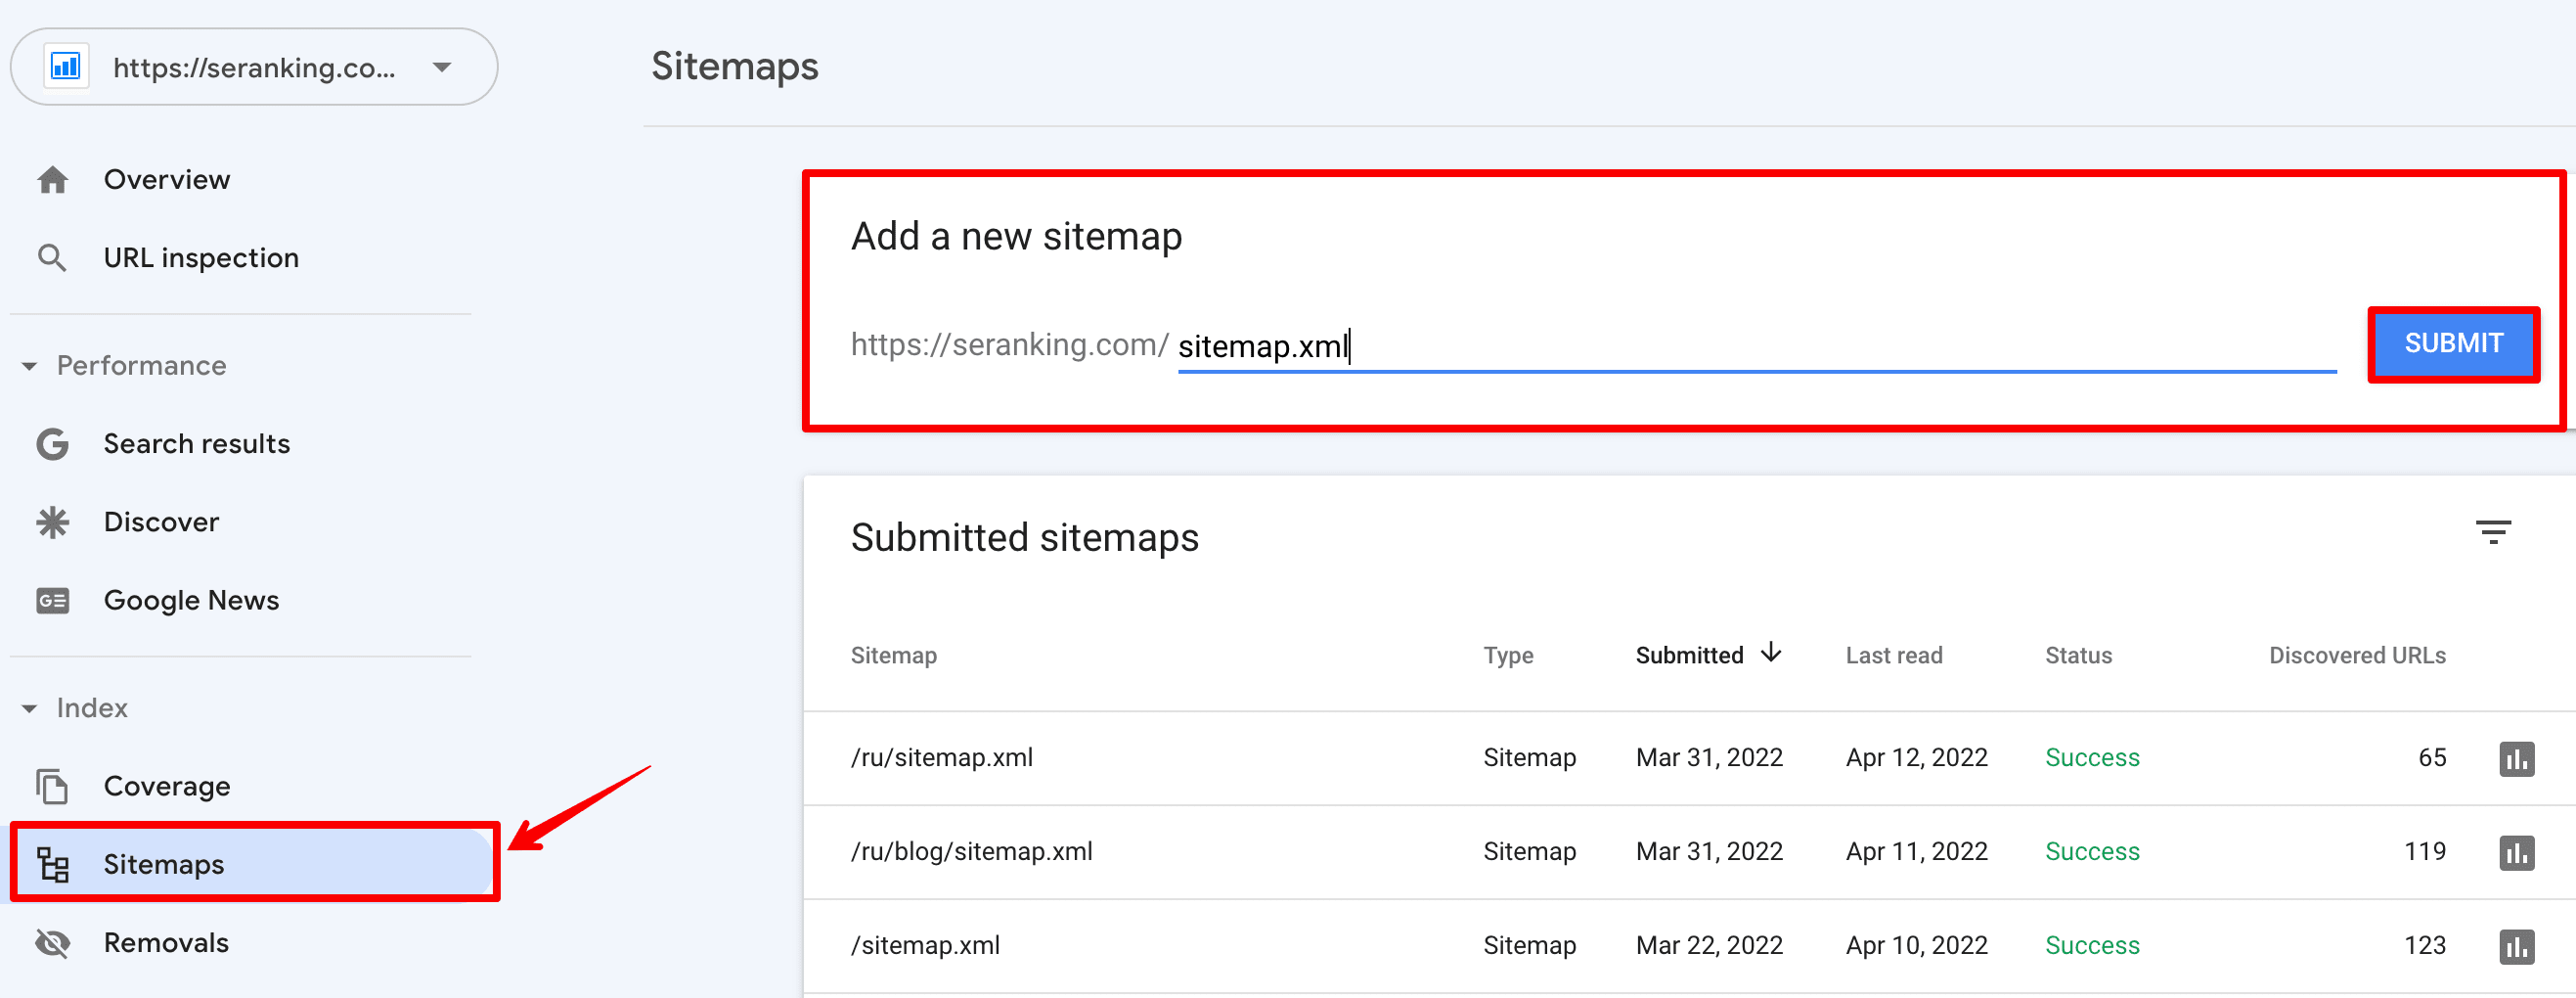 How to add a new sitemap in Google Search Console